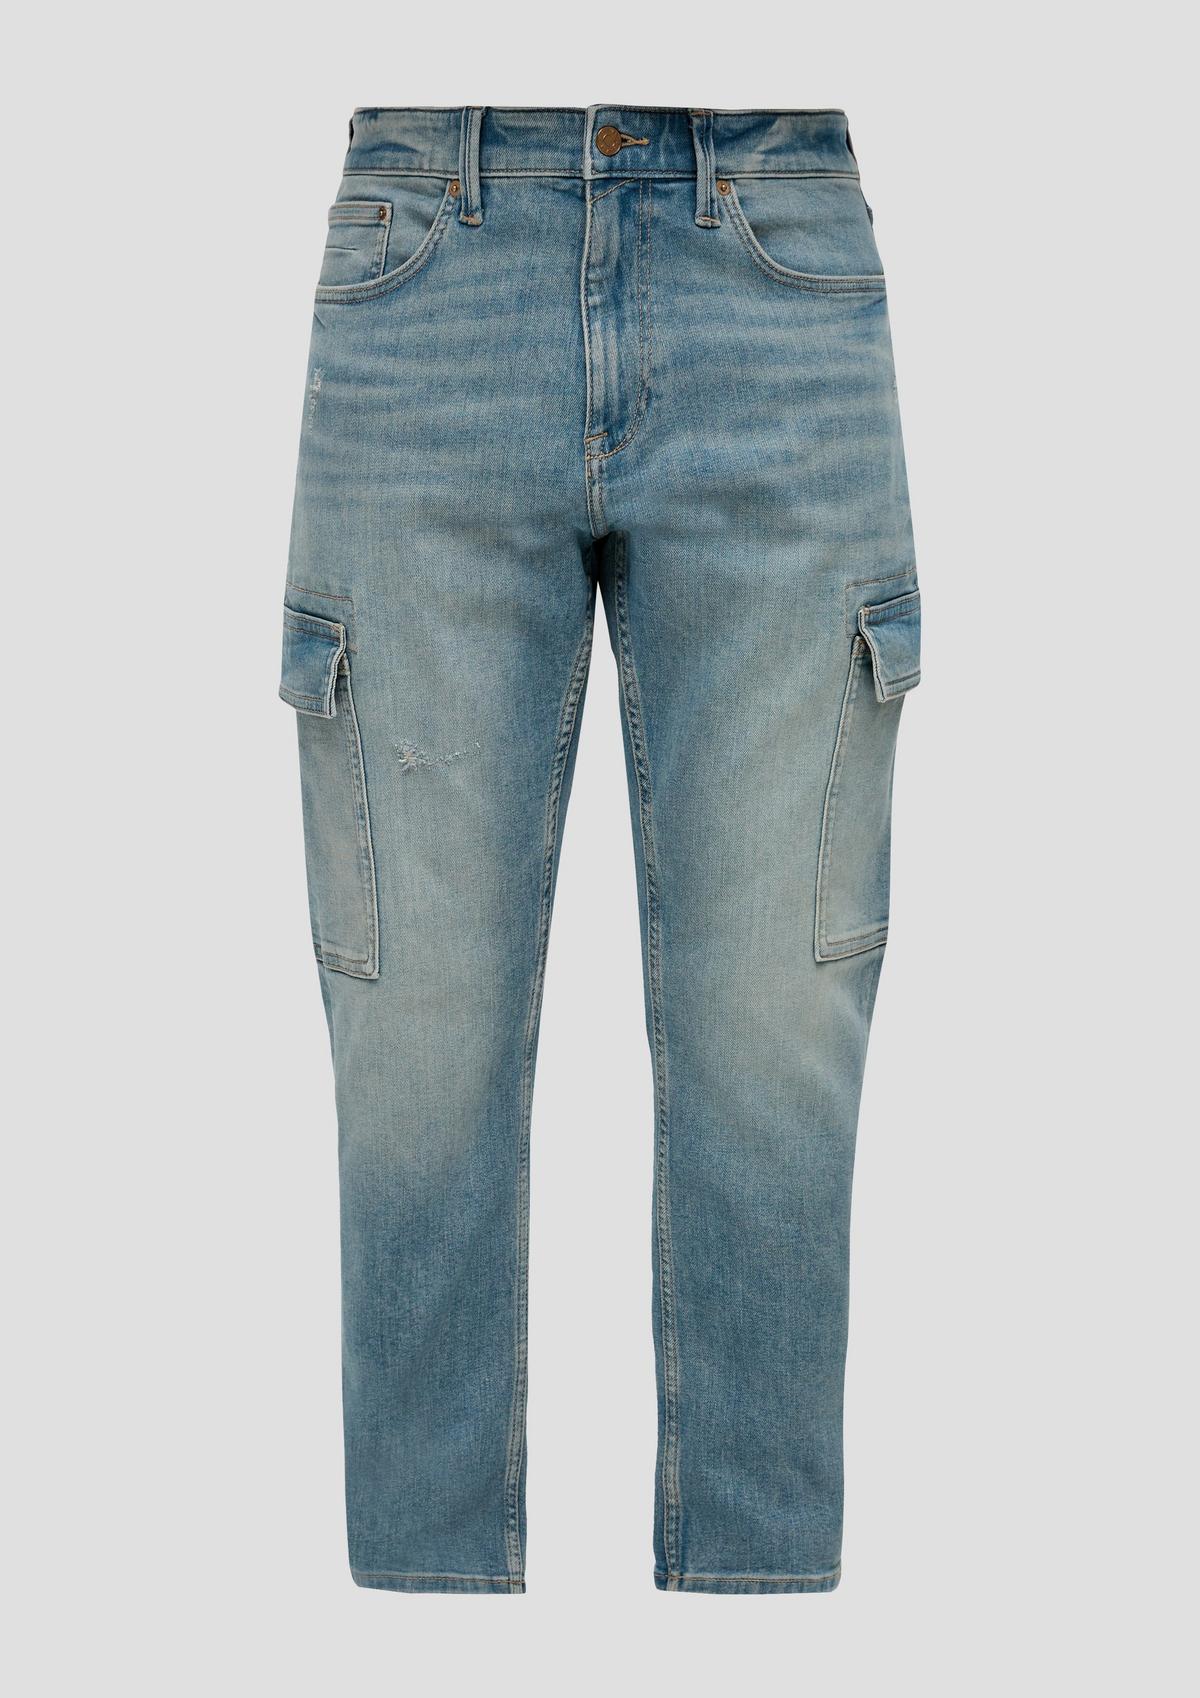 NEW s.Oliver MEN JEANS Big sizes 15€/KG Very good quality - bigger sizes -  Lithuania, New - The wholesale platform